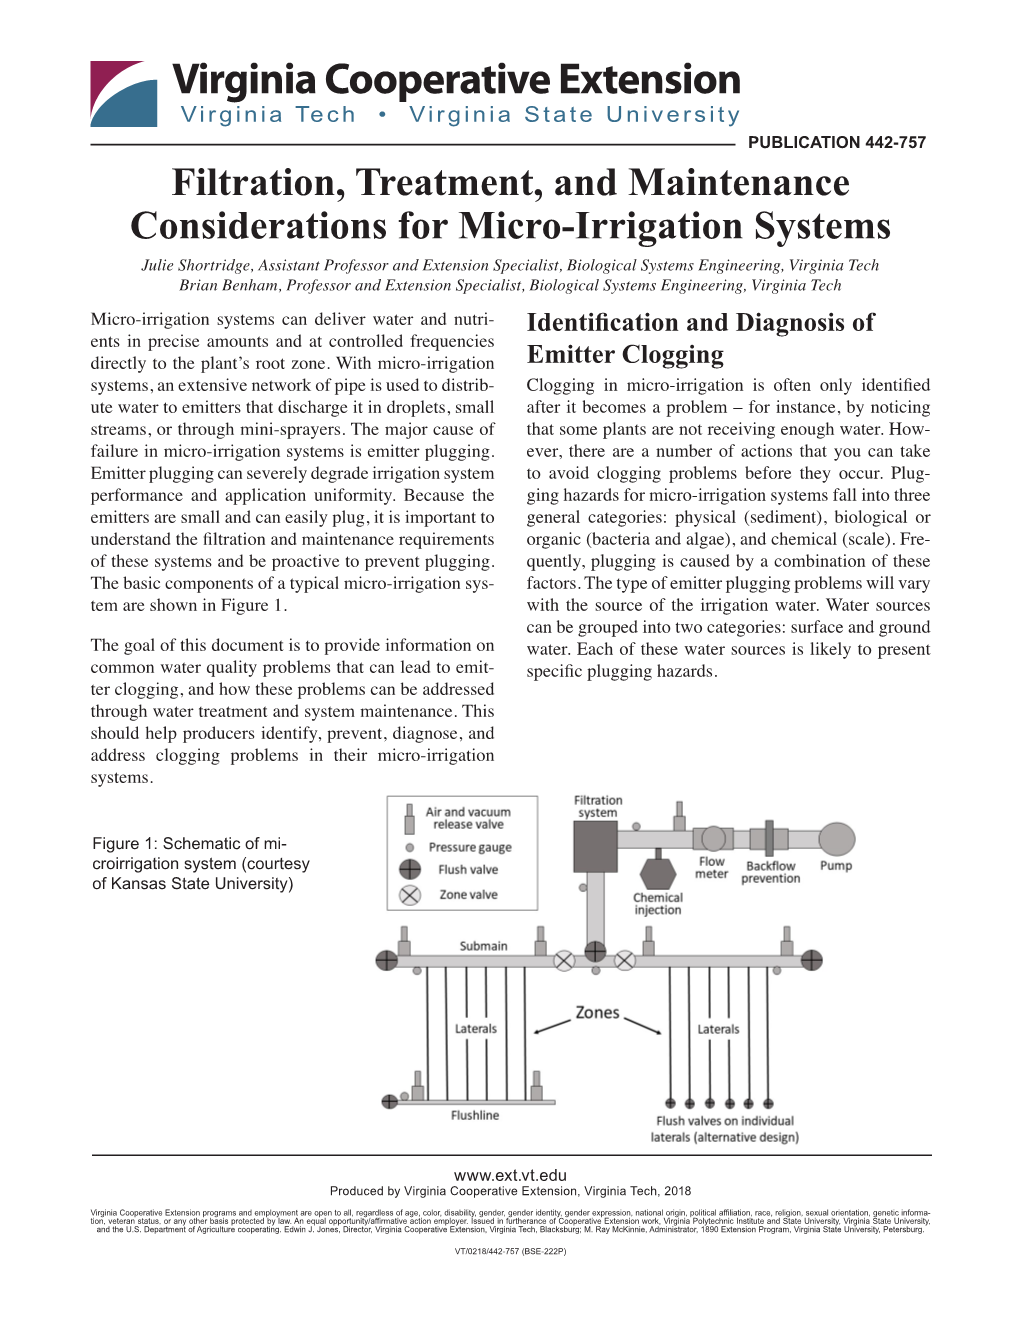 Filtration, Treatment, and Maintenance Considerations for Micro-Irrigation